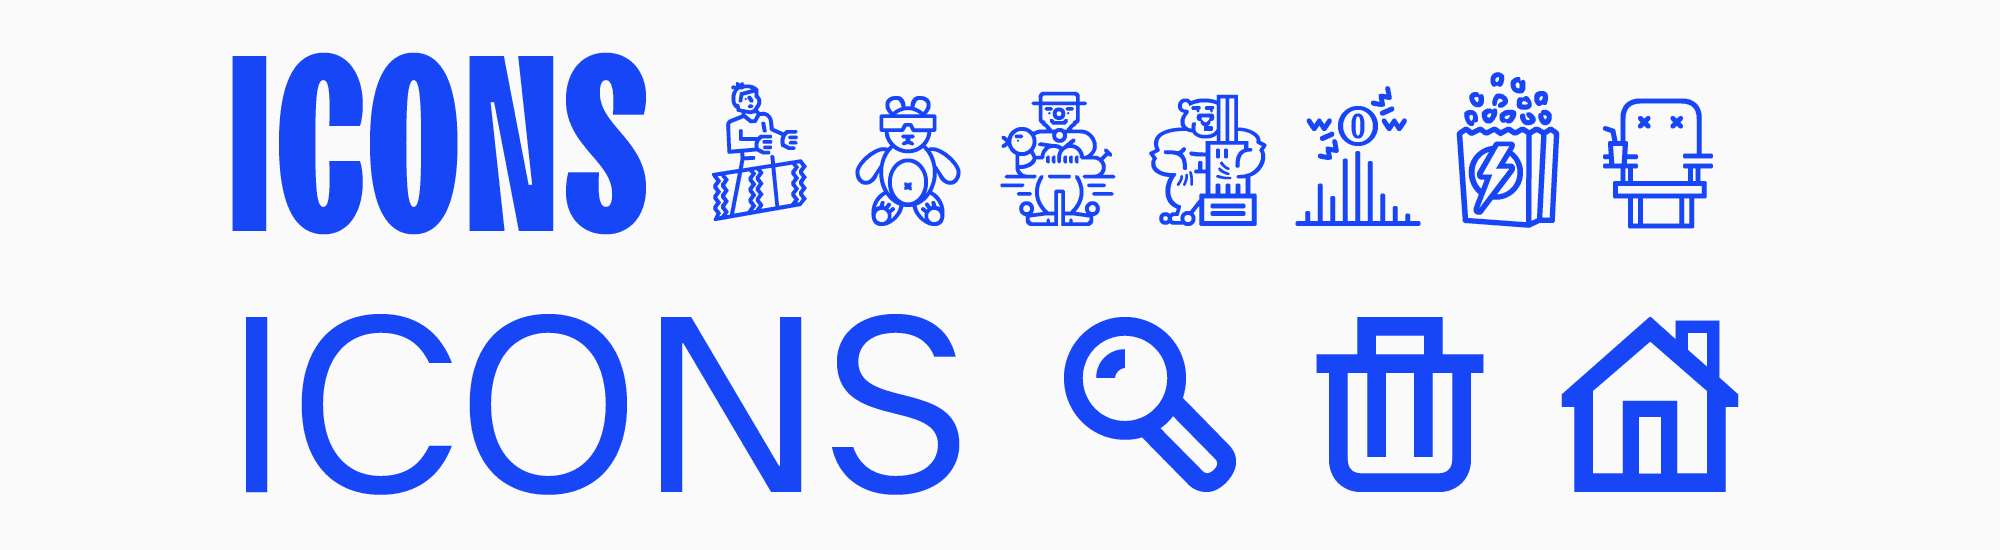 Icons &amp; Illustrations in Fonts: What are they, and what&#8217;s their purpose?